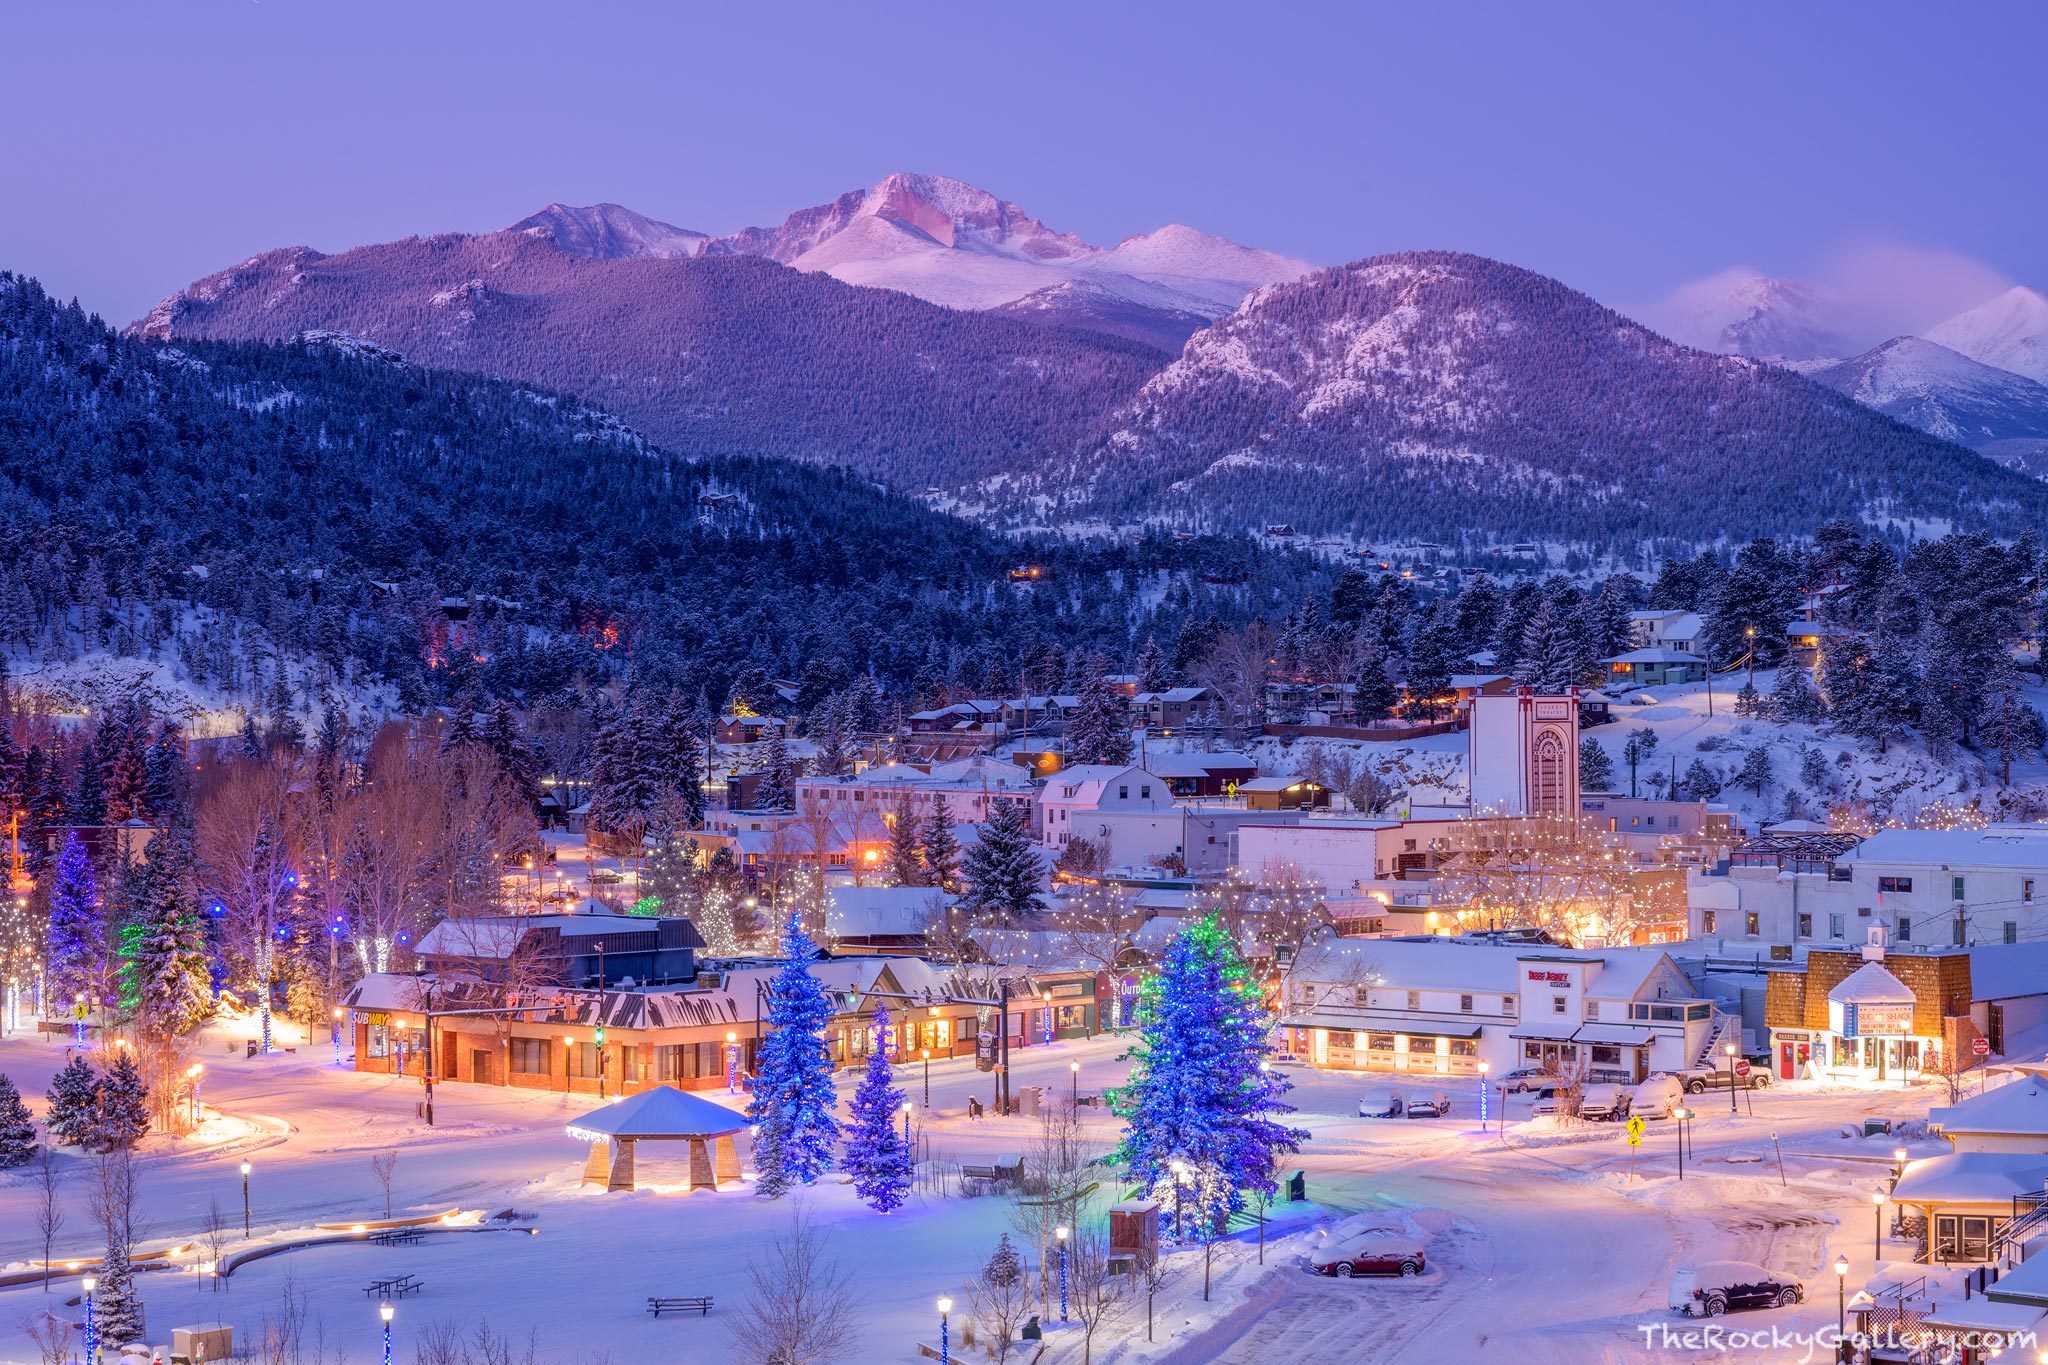 Its an idyllic scene over downtown Estes Park shortly before dawn on a chilly February morning. Snow has fallen over Estes Park...